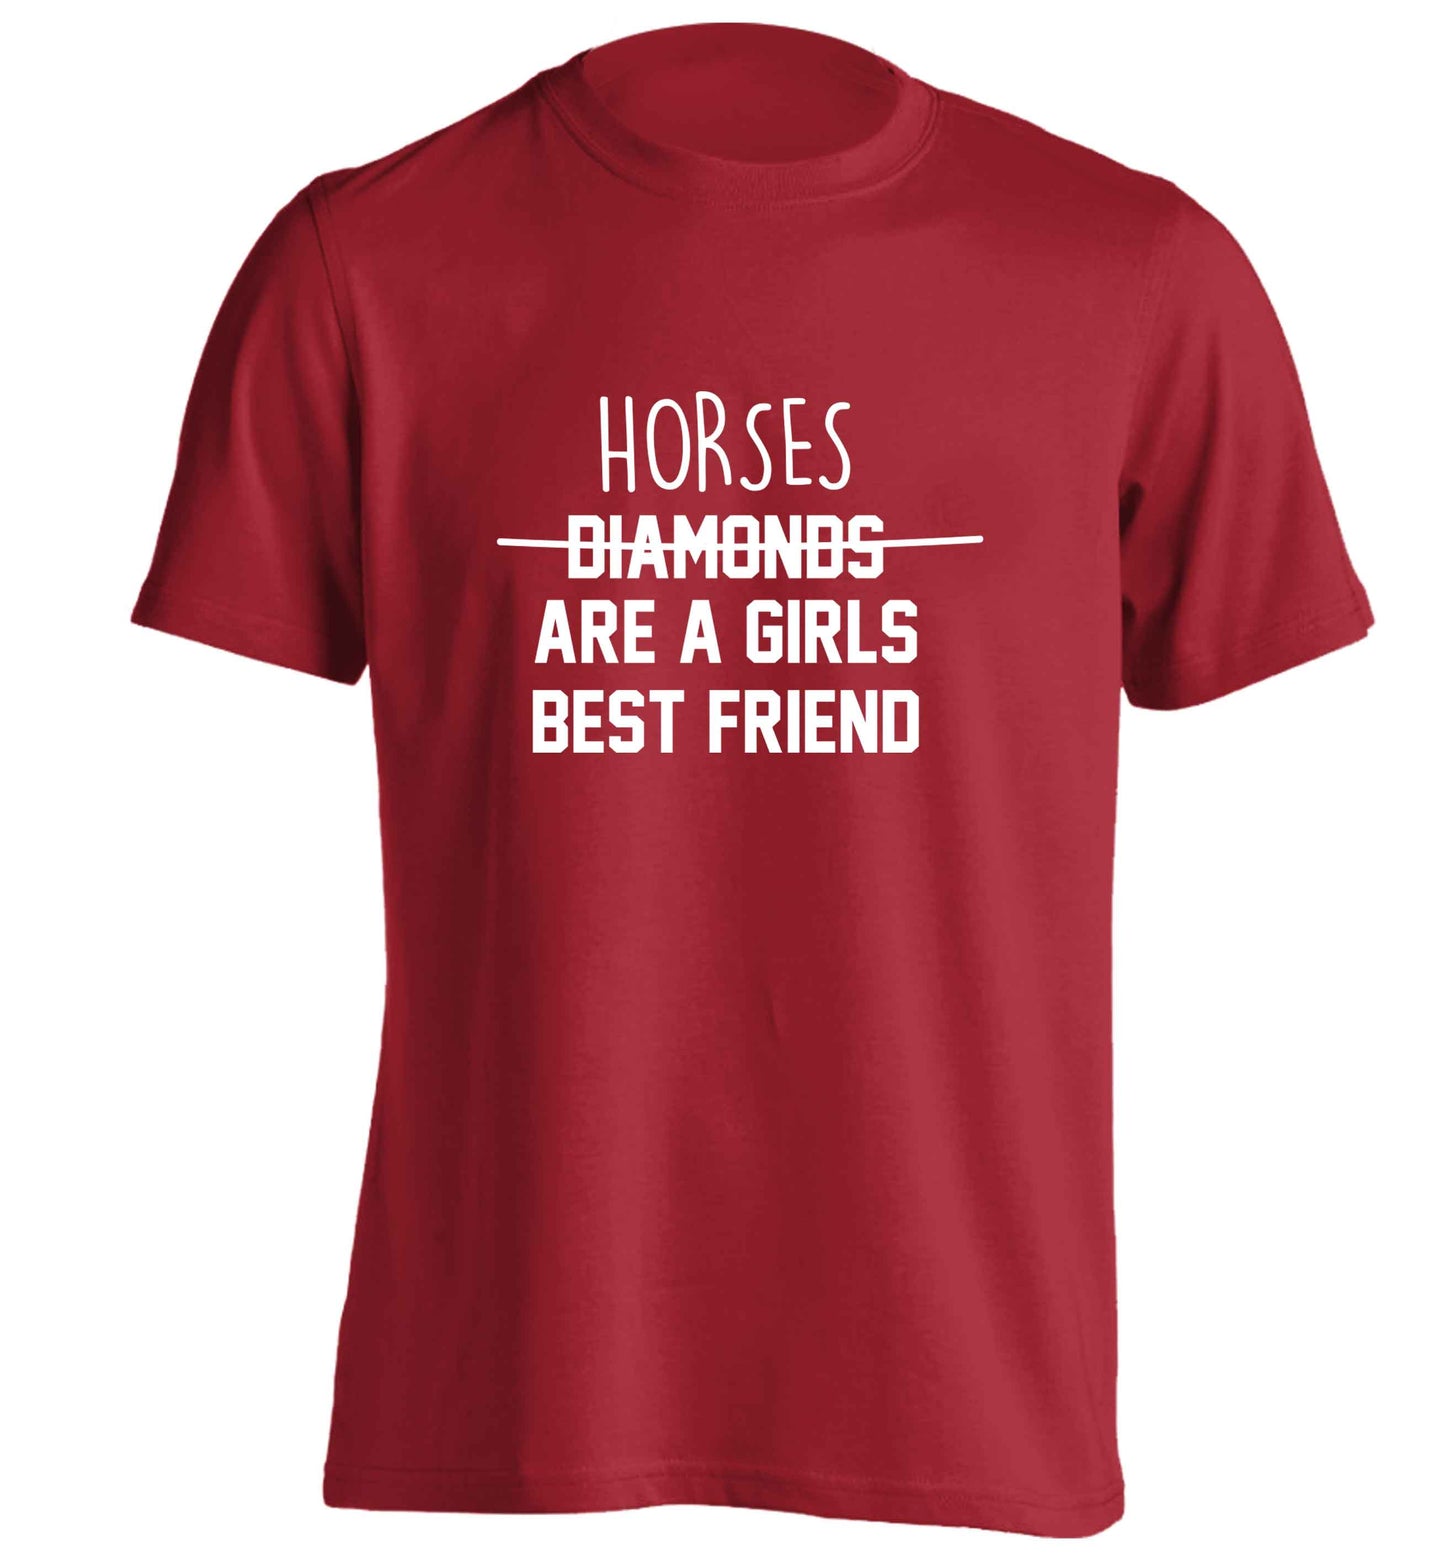 Horses are a girls best friend adults unisex red Tshirt 2XL